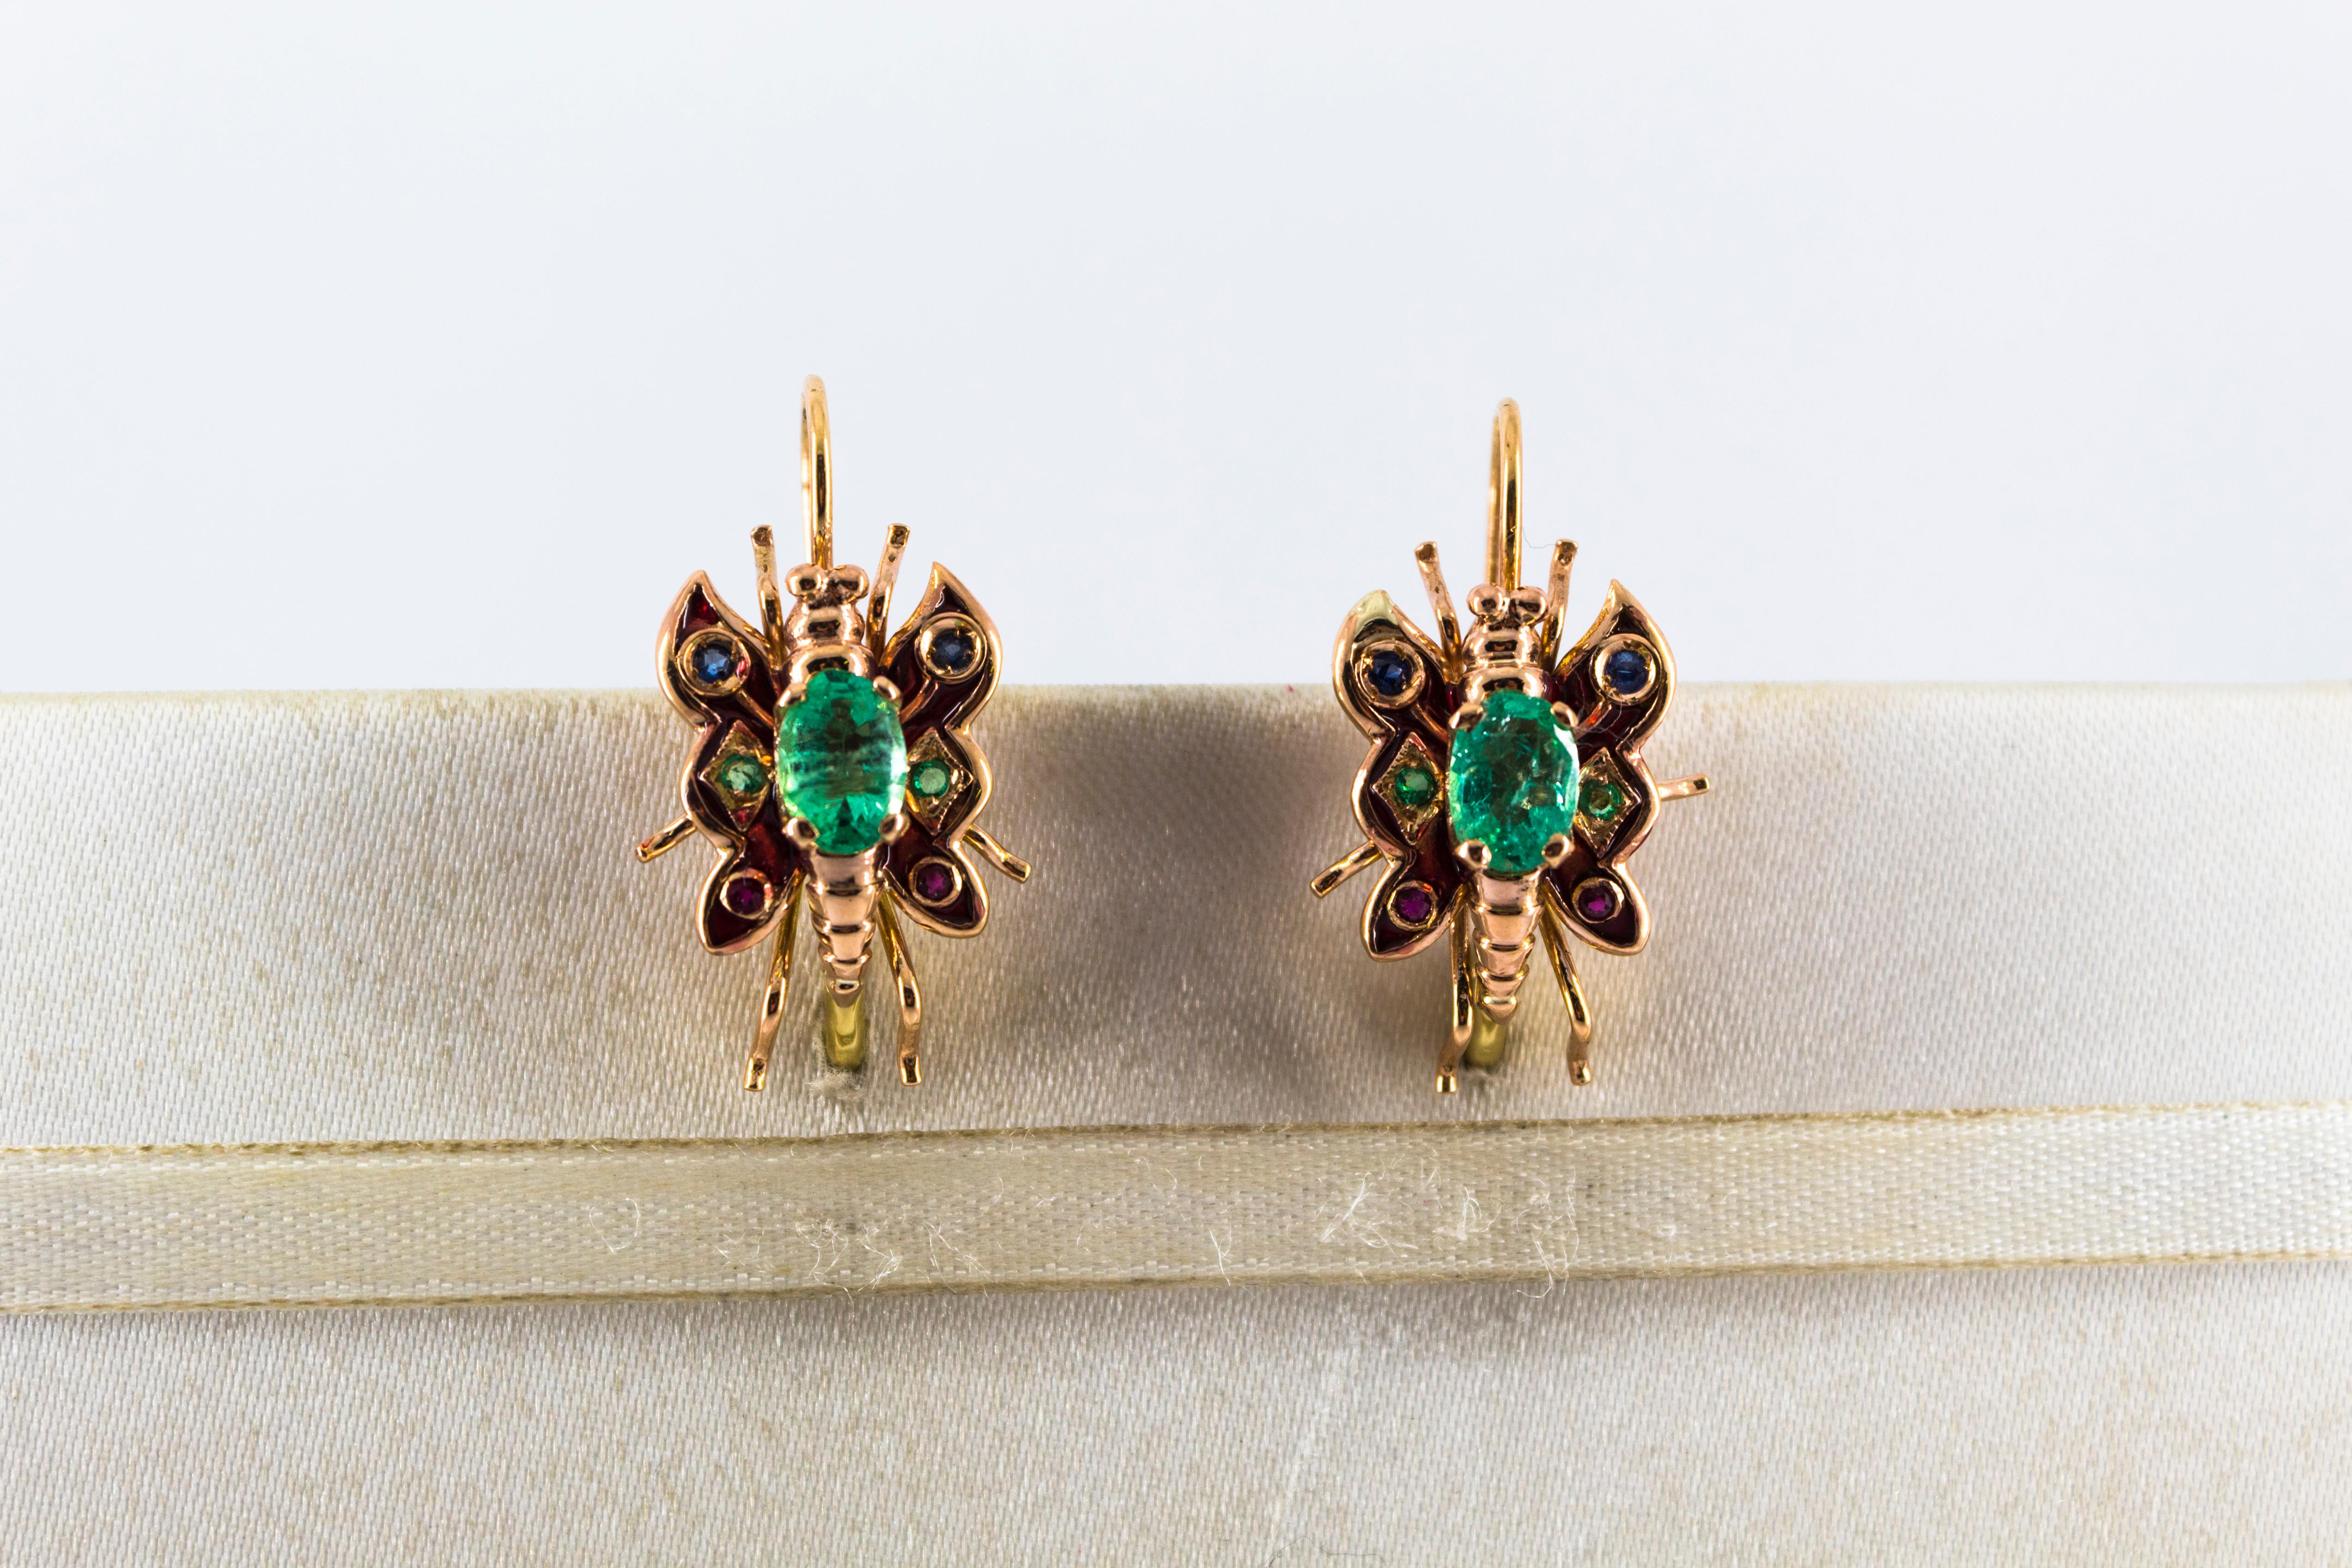 These Lever-Back Earrings are made of 9K Yellow Gold.
These Earrings have also 2.20 Carats of Emeralds, Rubies and Blue Sapphires.
These Earrings are available with central Ruby, Emerald or Blue Sapphire.
These Earrings have also Enamel.
All our